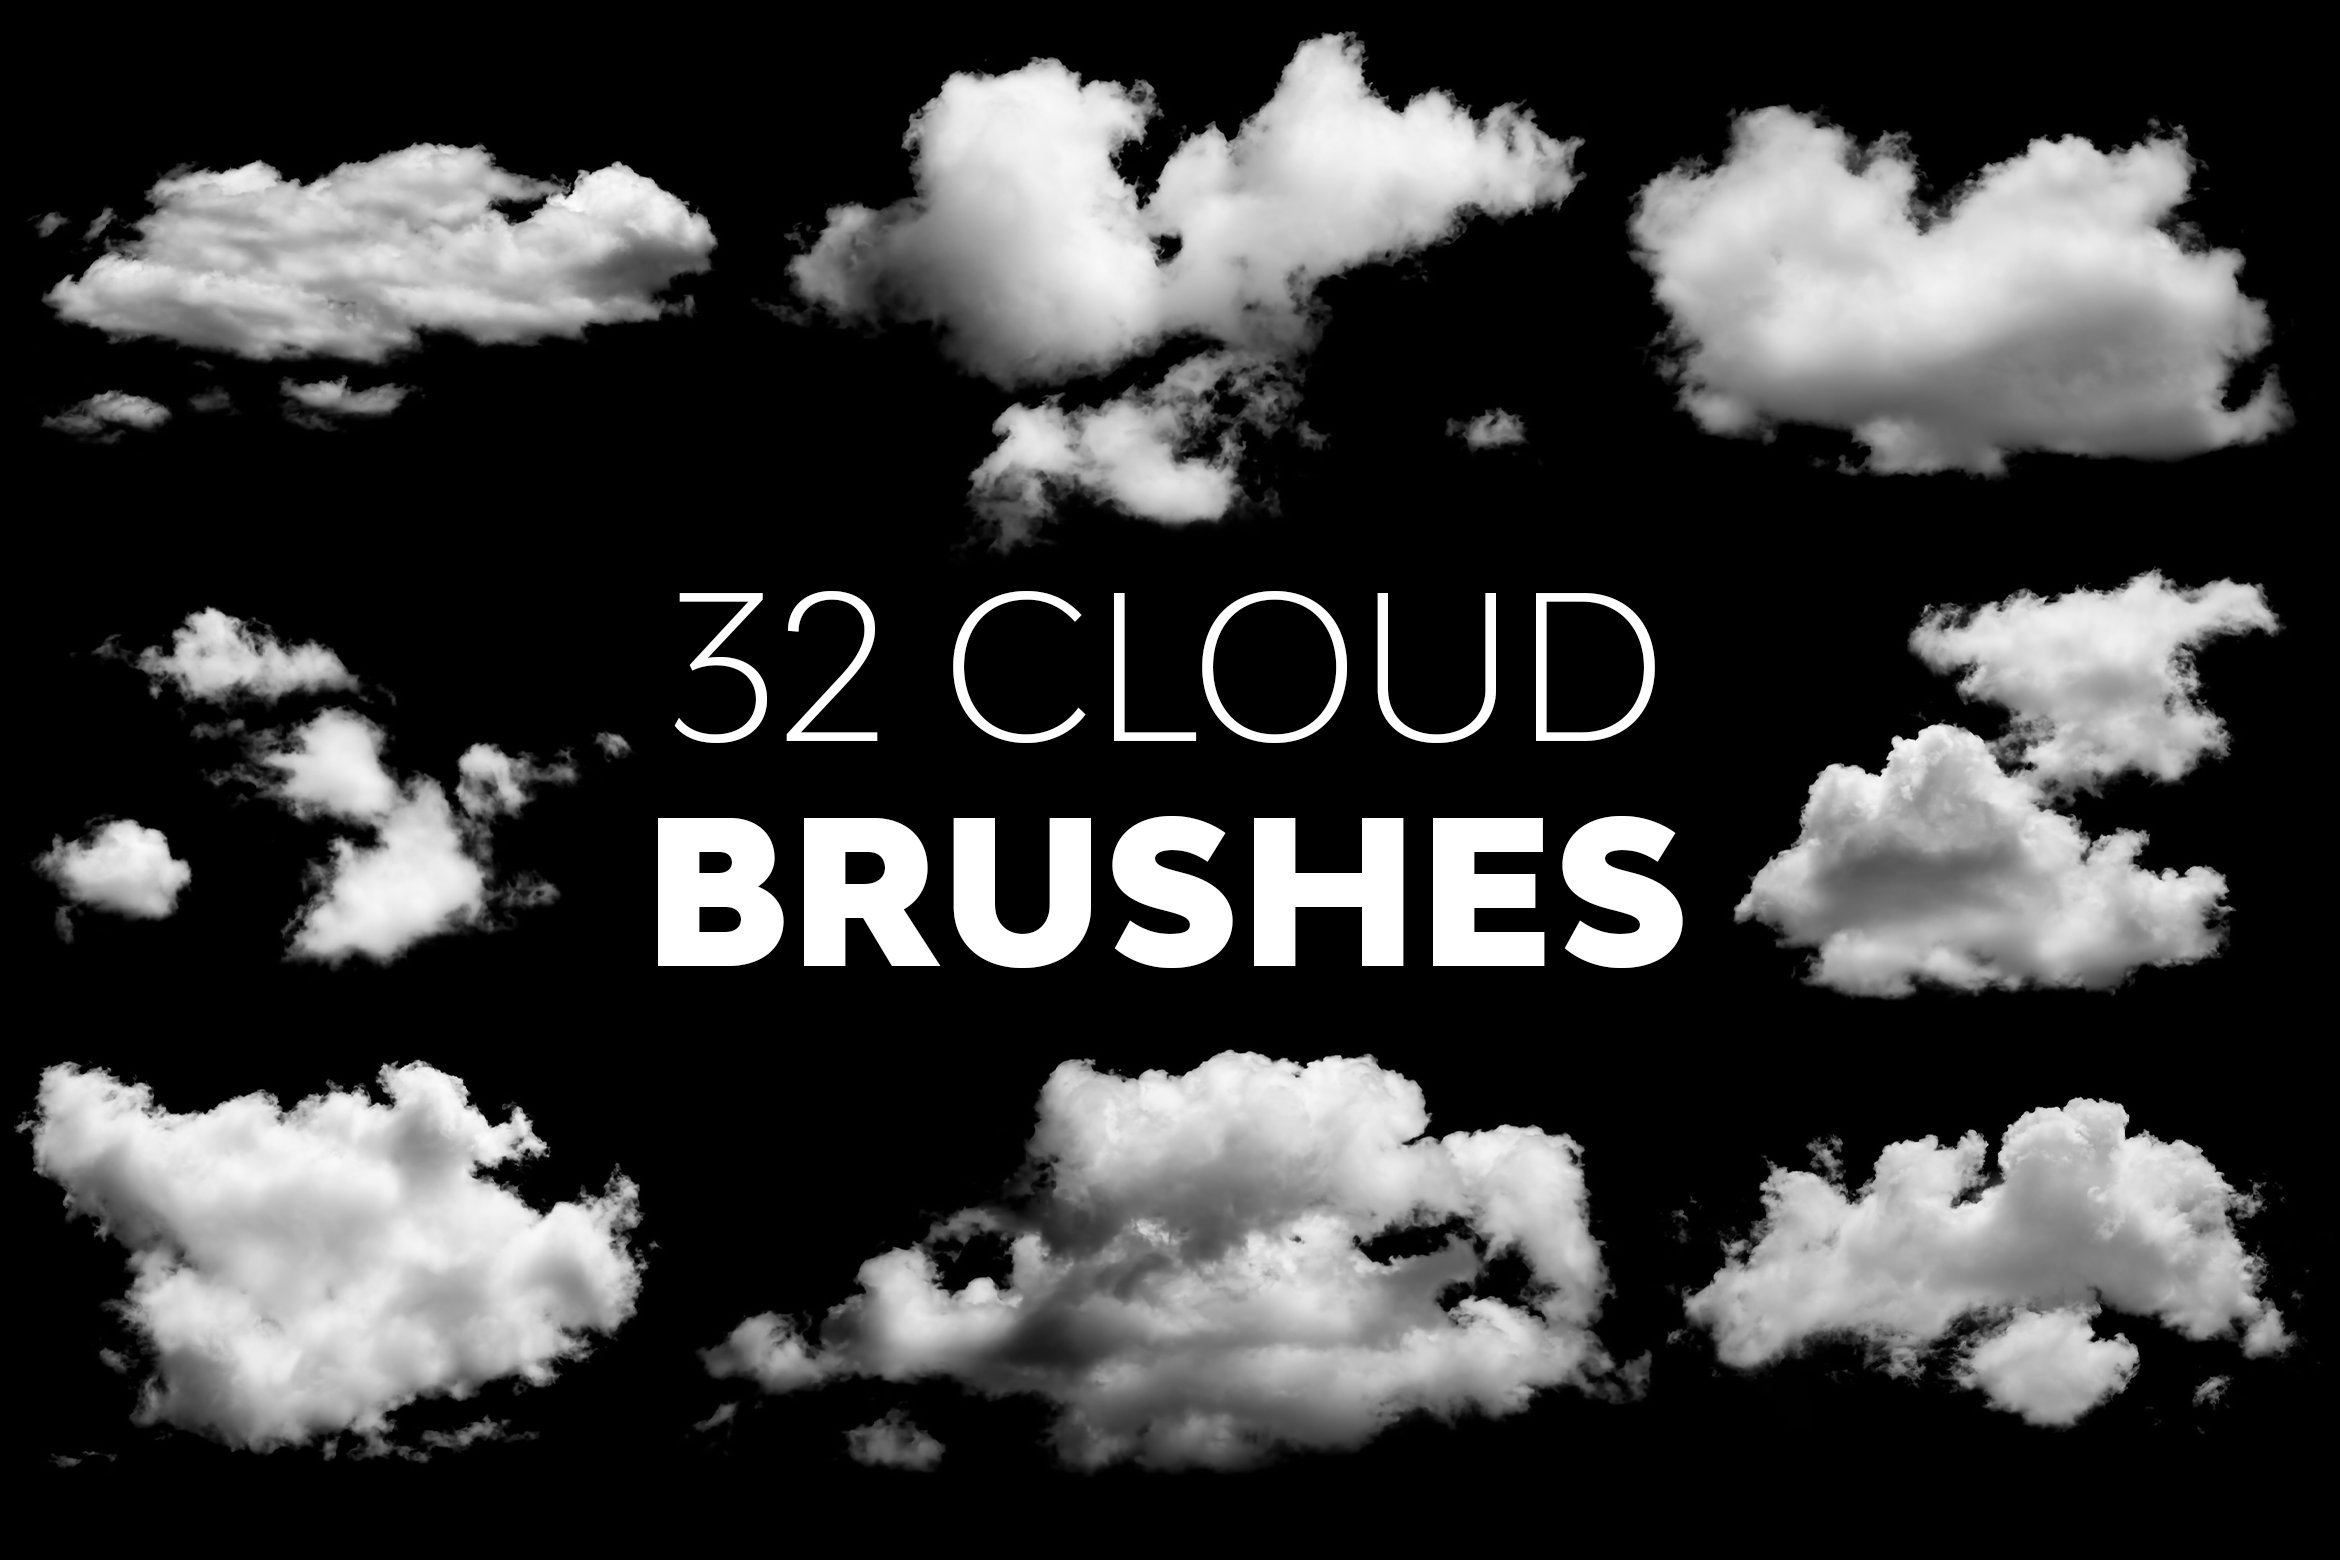 Cloud Brushescover image.